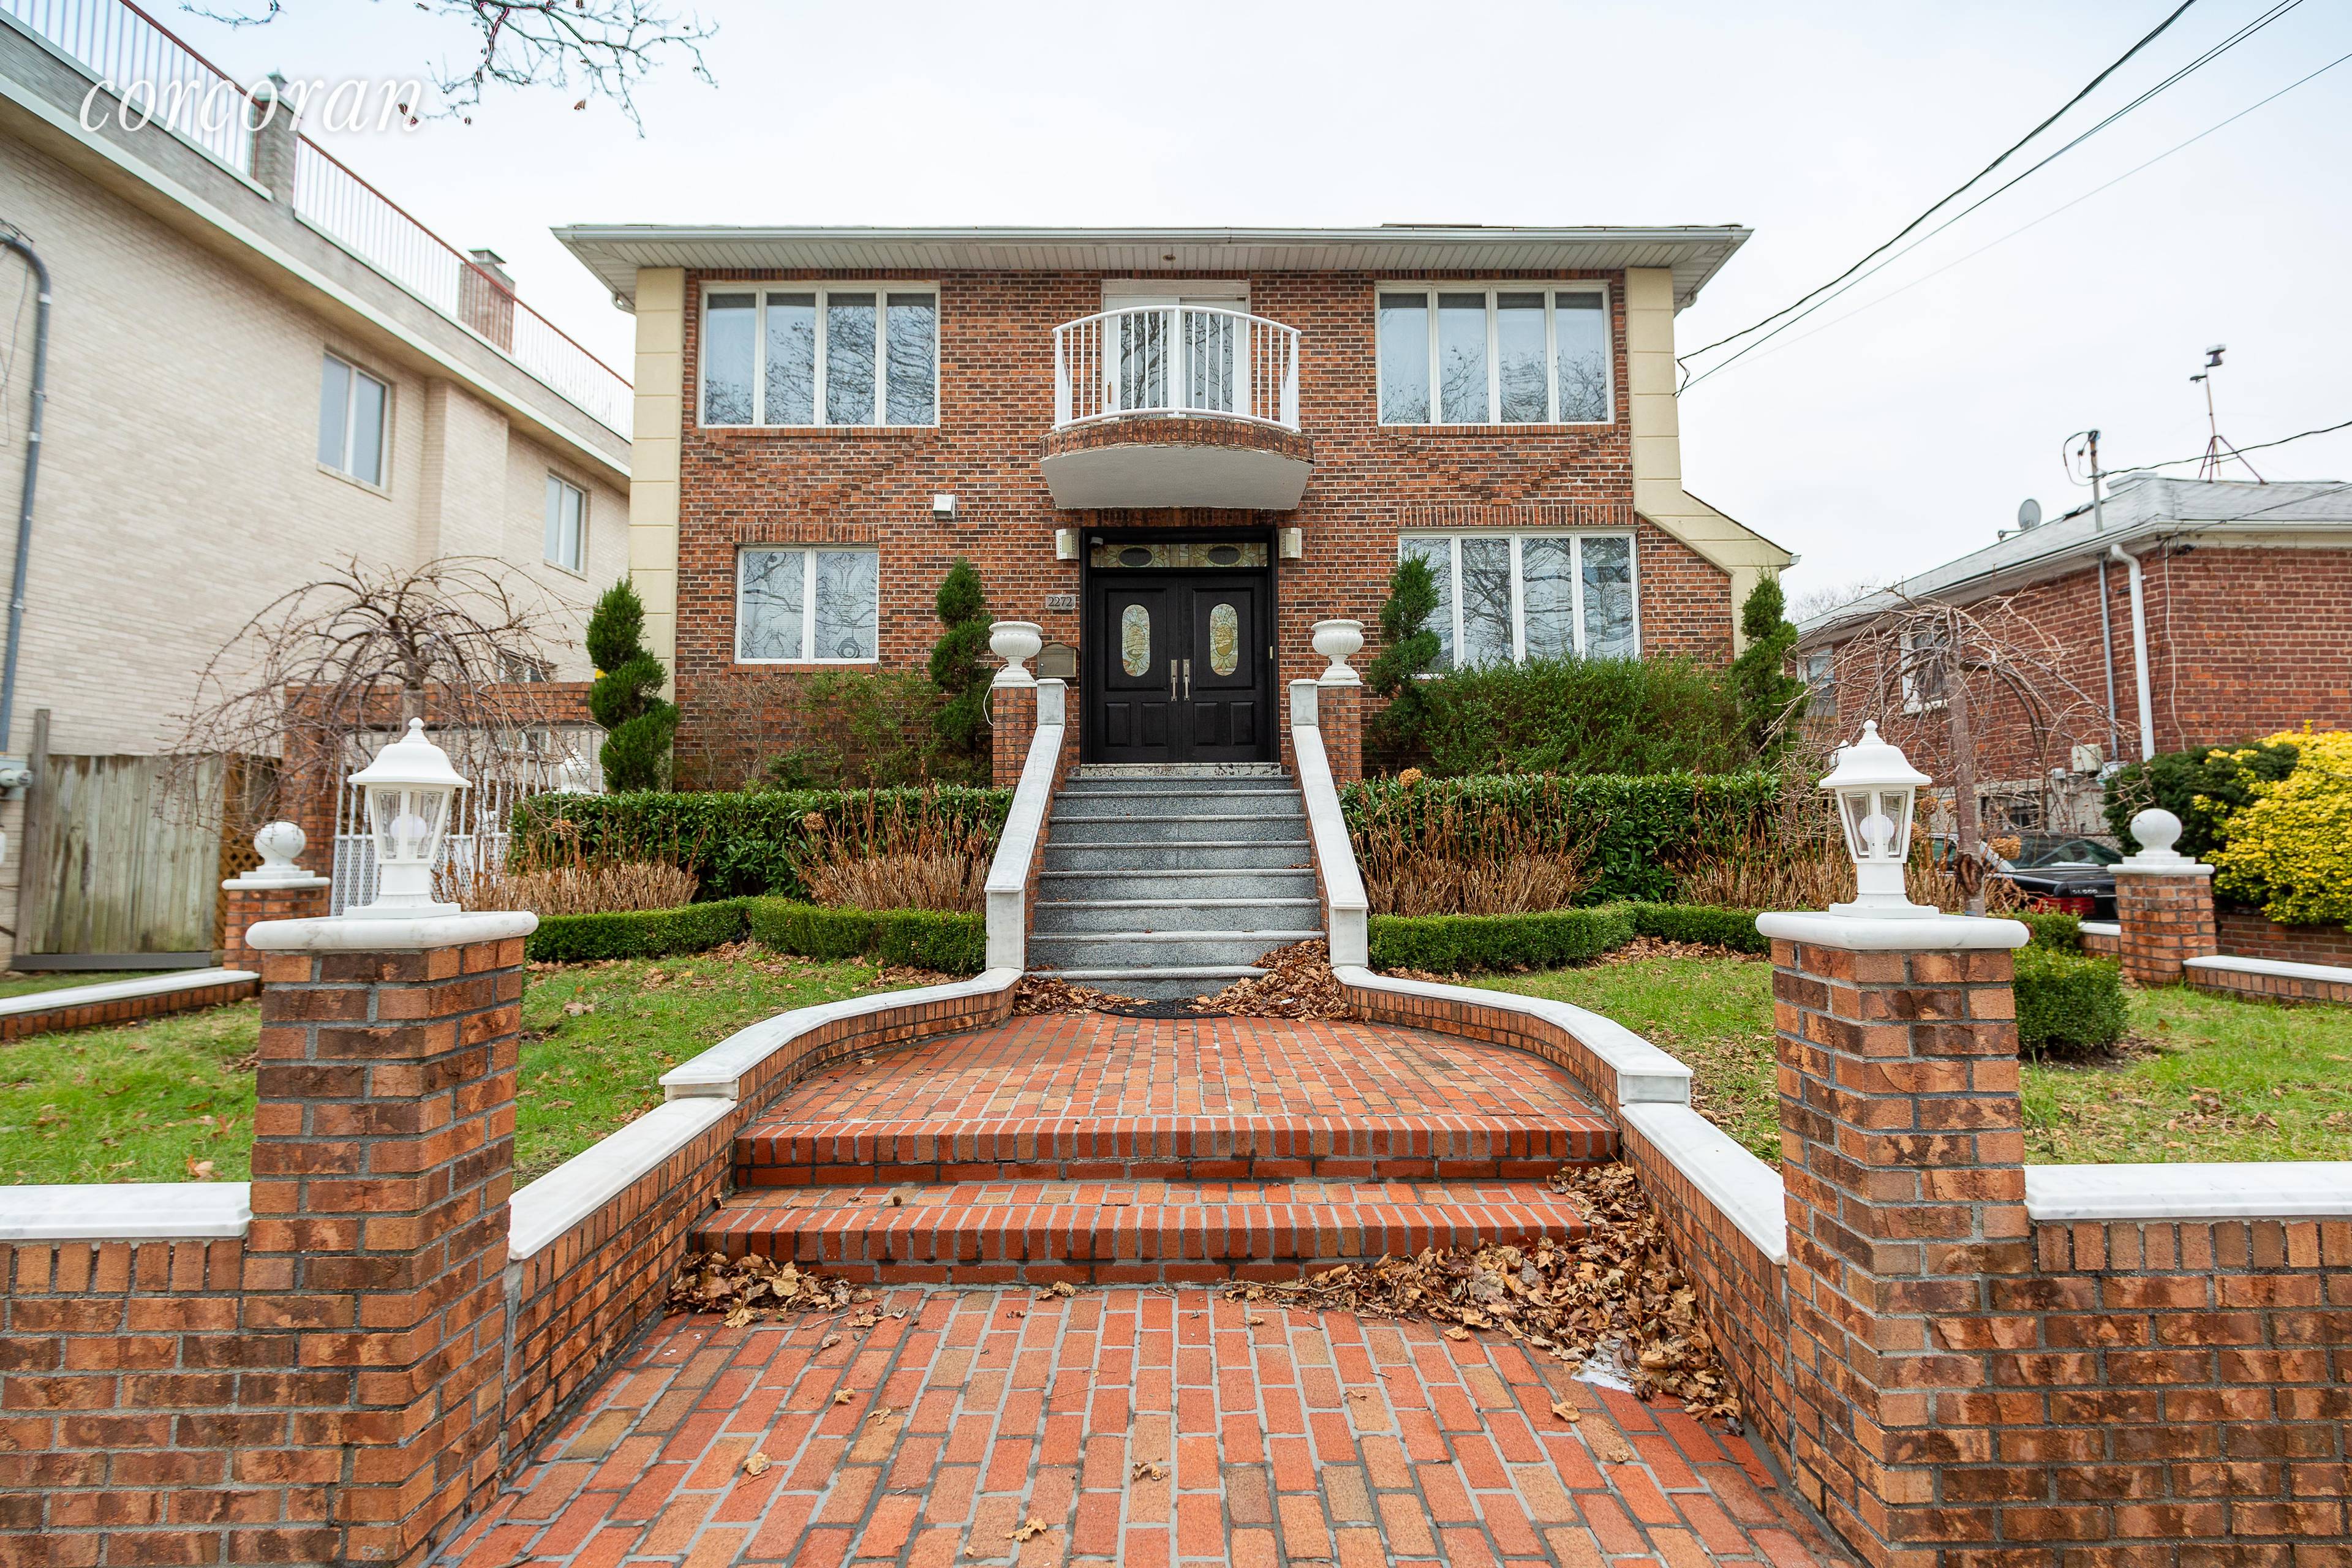 Welcome to 2272 E. 64th Street, a one of a kind, fully detached, renovated, brick, center hall colonial mansion on one of Mill Basins most coveted and quaint tree lined ...